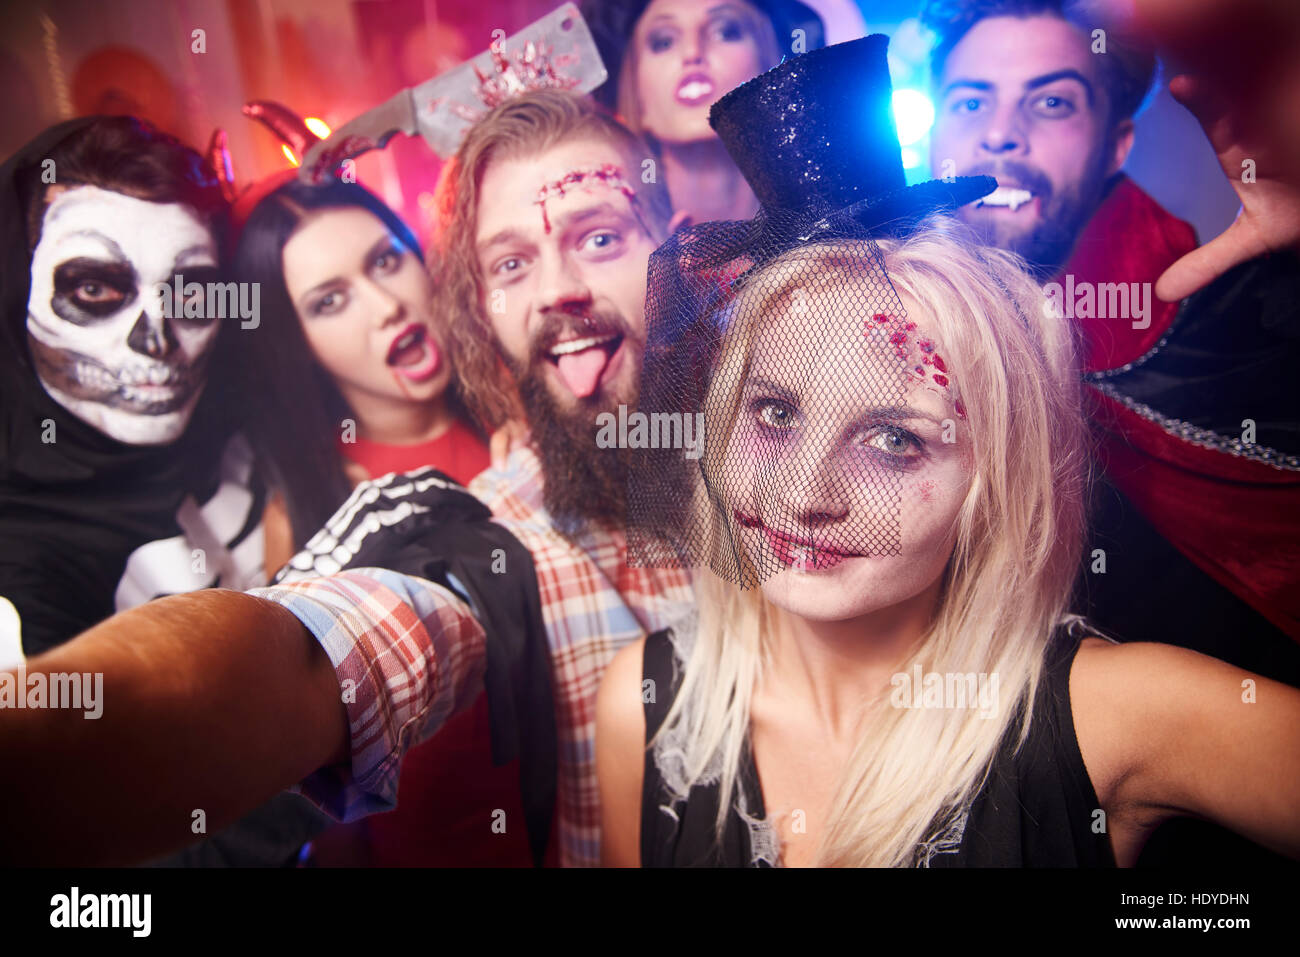 Selfie taken at the halloween party Stock Photo